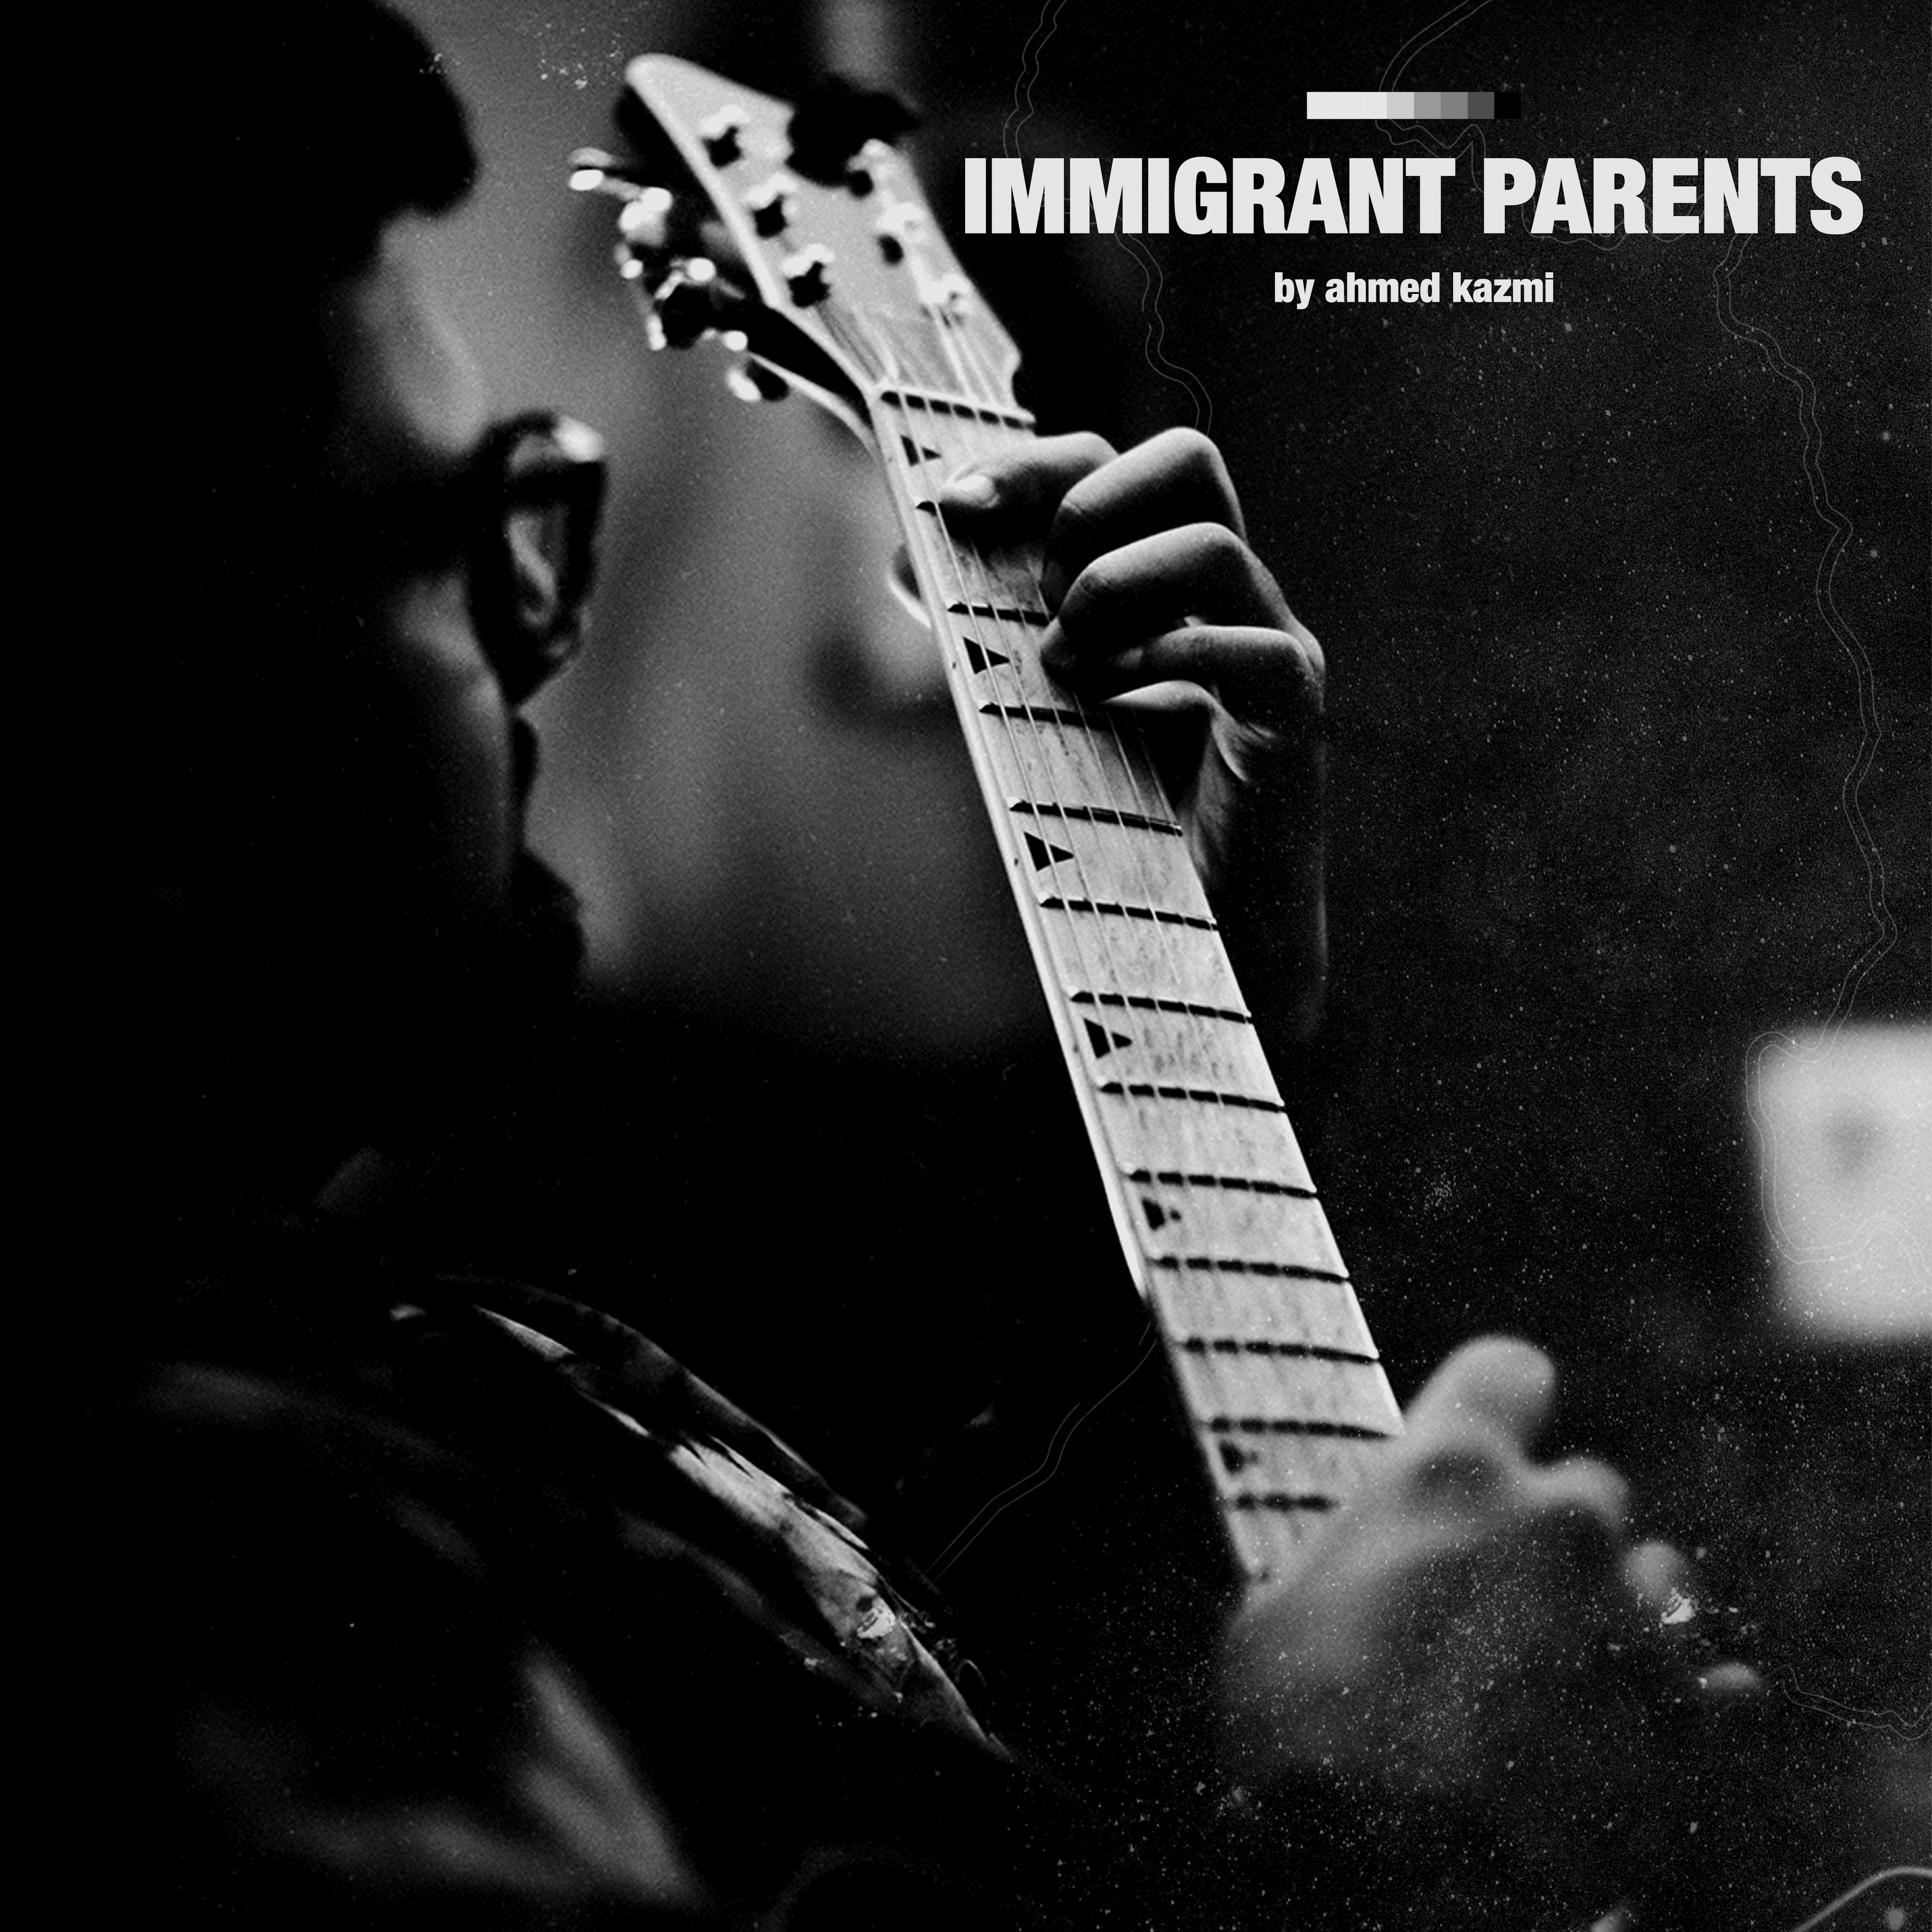 Cover art for Ahmed Kazmi's song: Immigrant Parents